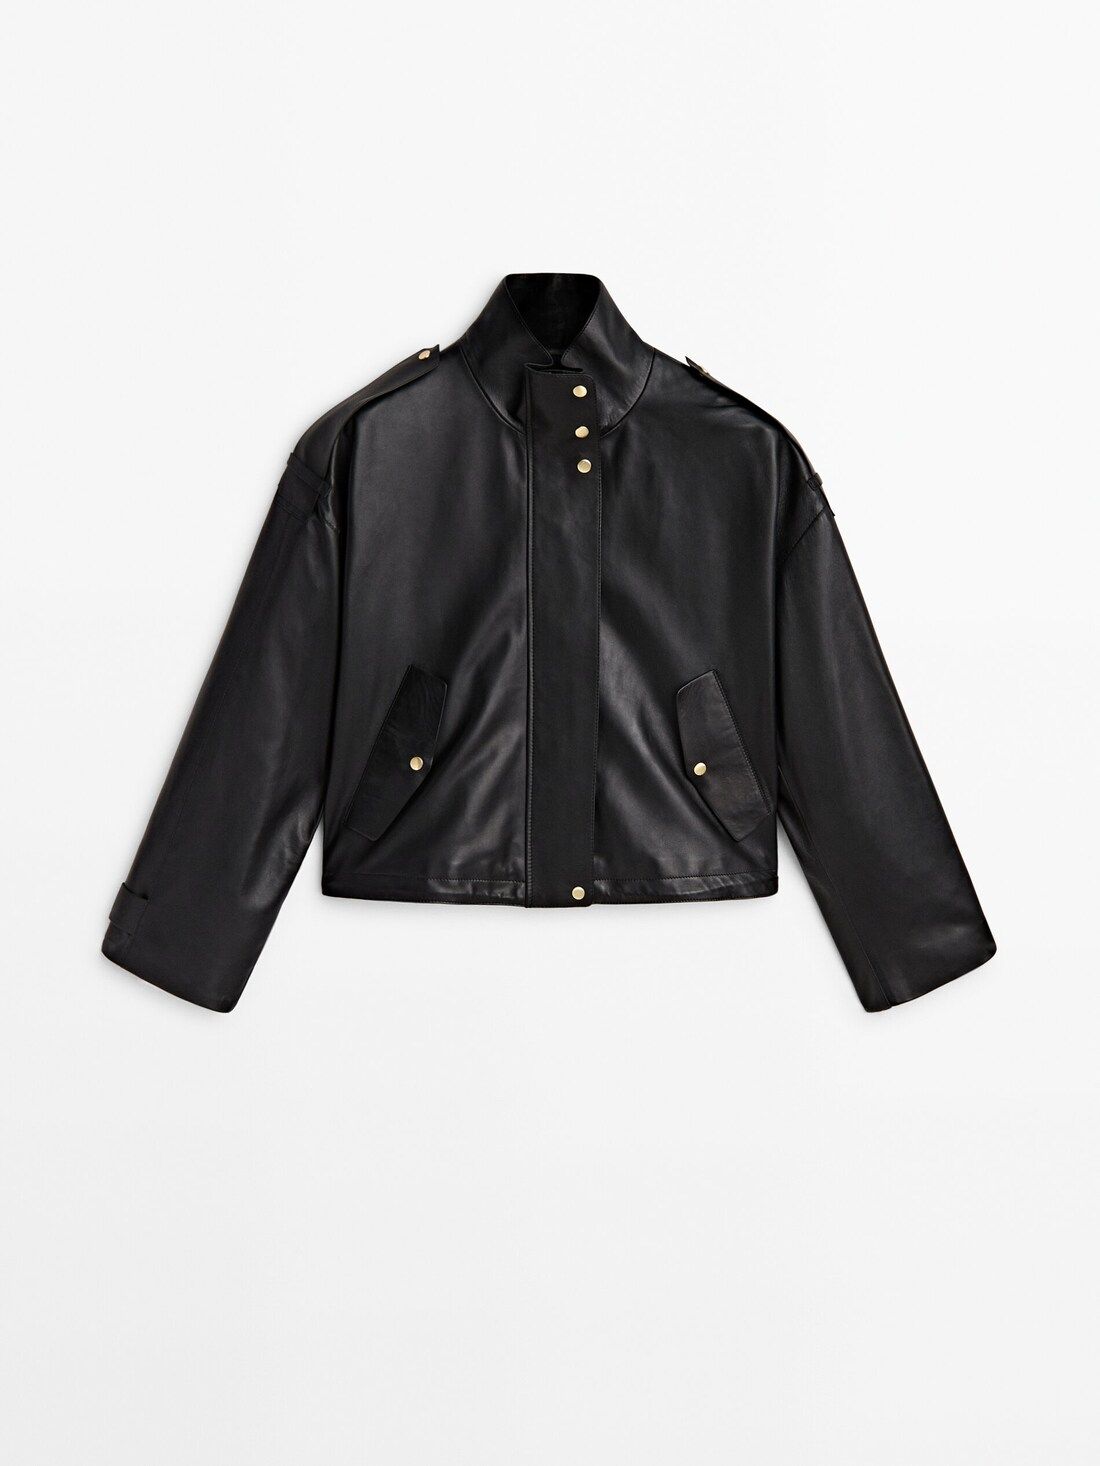 Nappa leather jacket with gold-toned snap buttons | Massimo Dutti UK